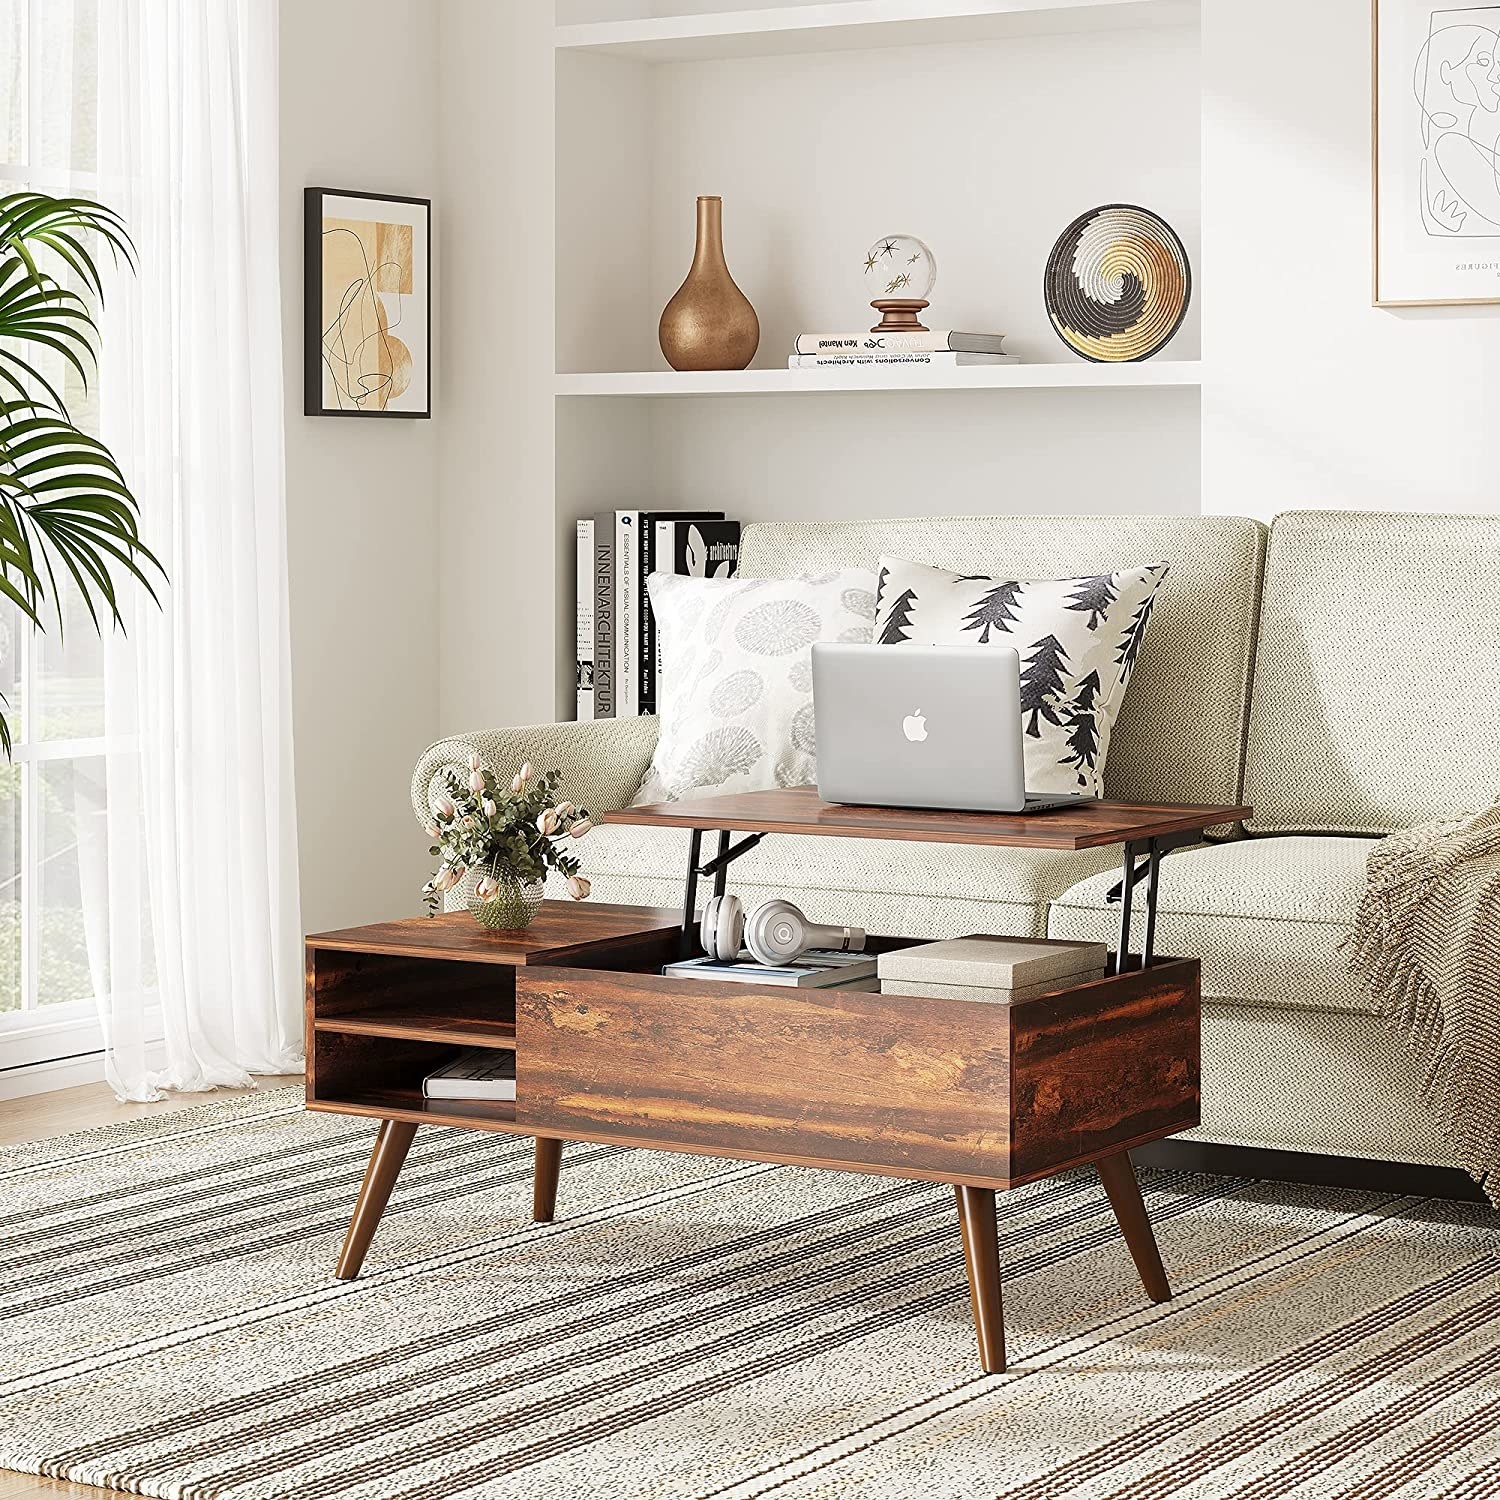 the brown wooden coffee table, which has open shelving on one side